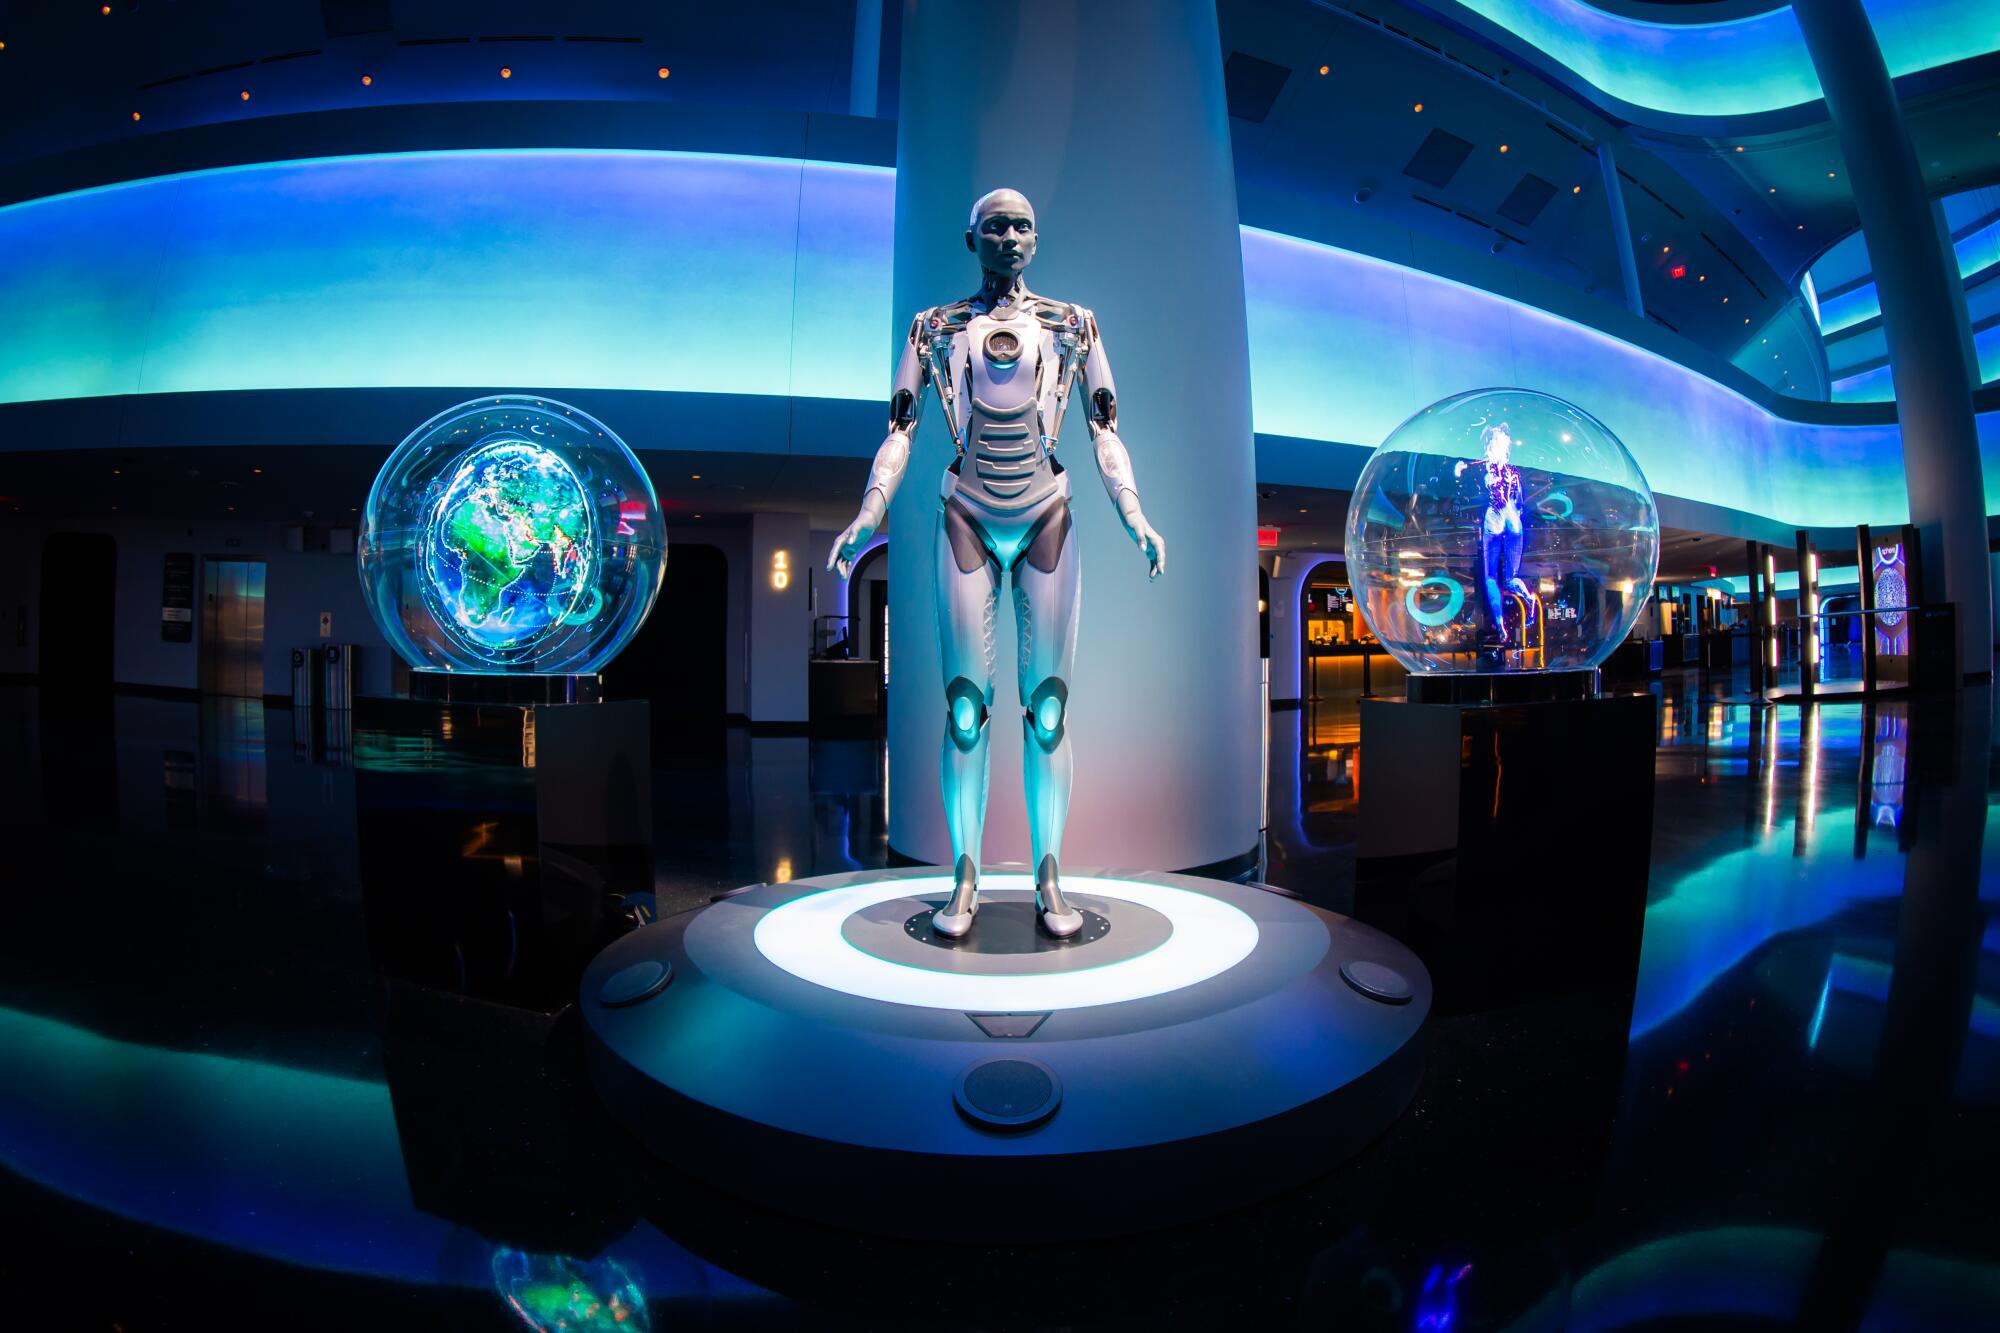 A robot with a woman's face and a mechanical body standing between two glass spheres in an atrium illuminated in blue